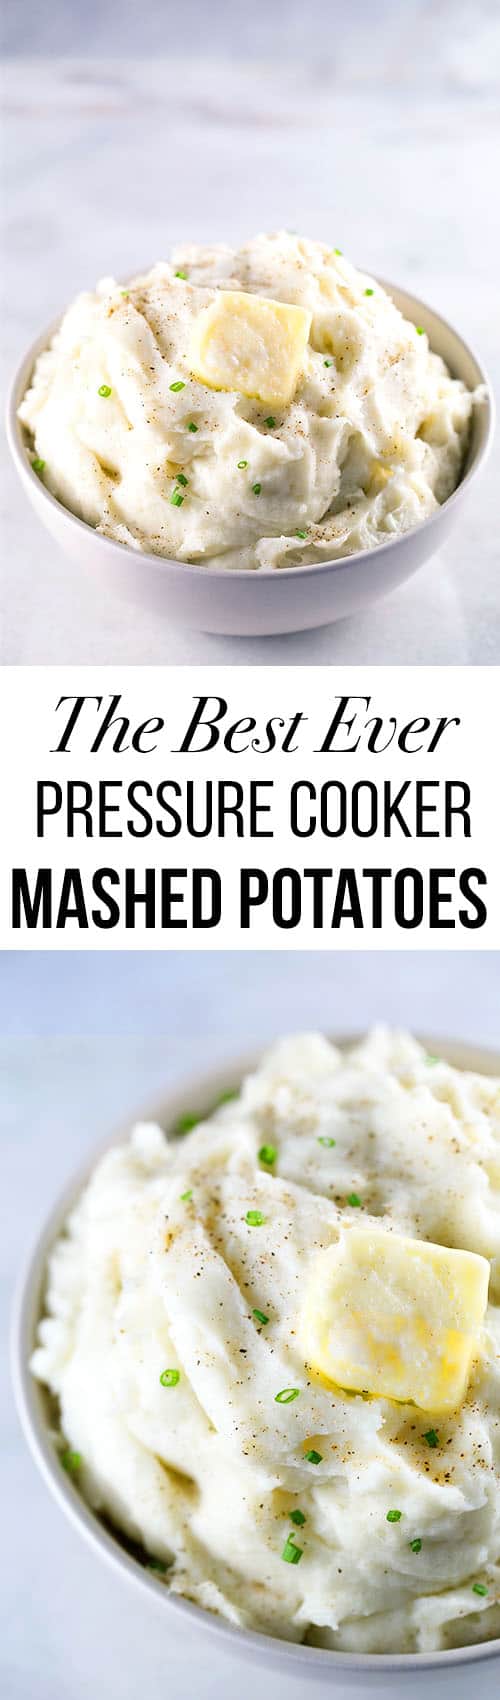 Bowl of mashed potatoes. Text on image: The best ever pressure cooker mashed potatoes.